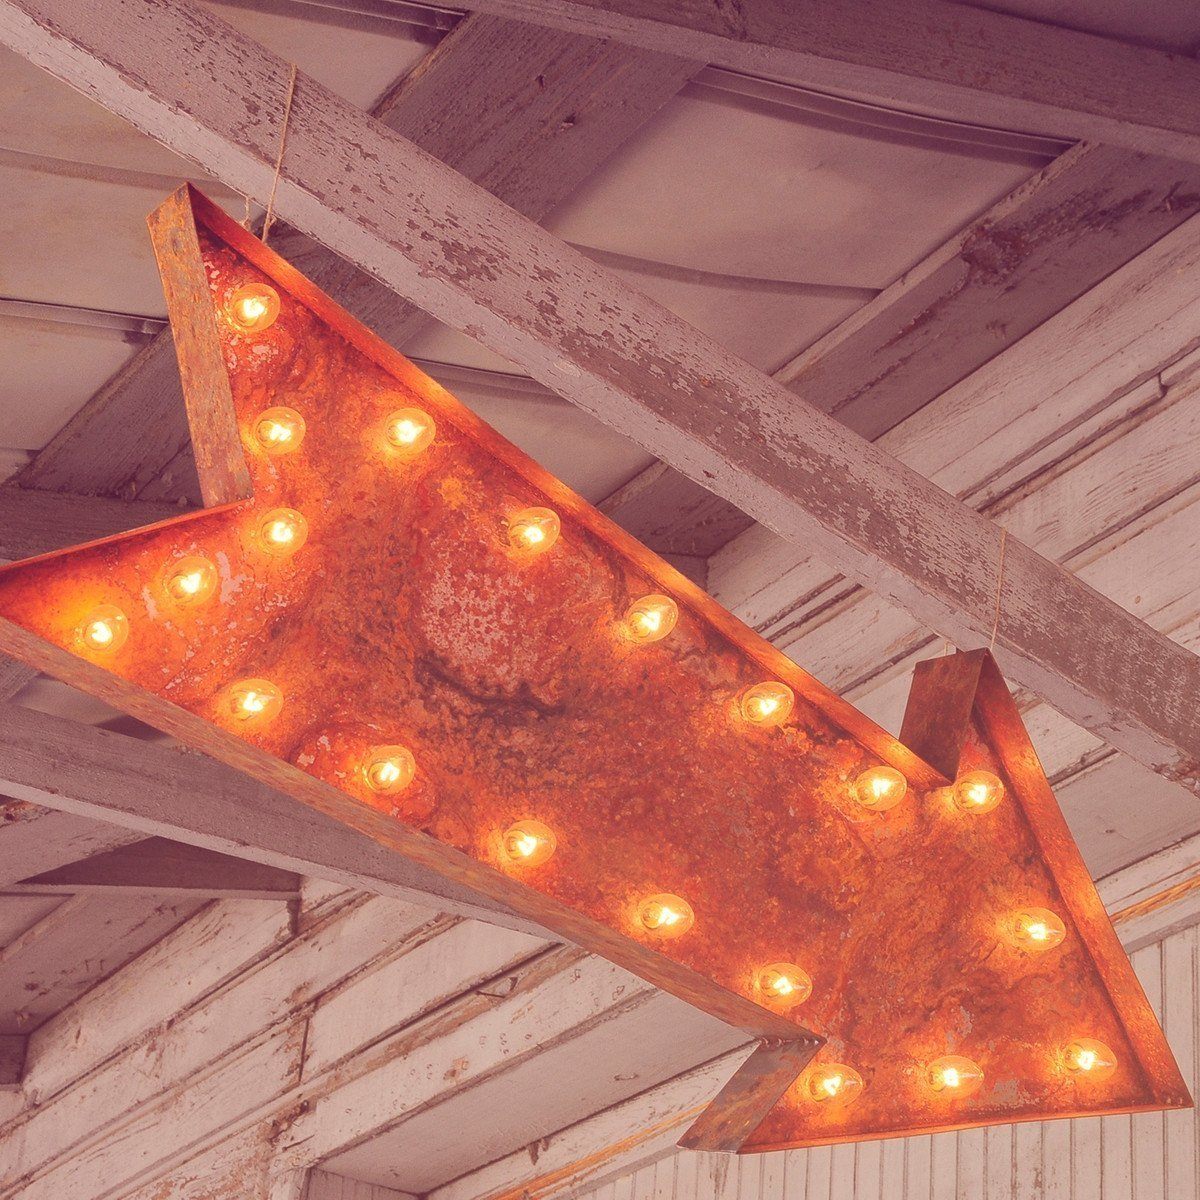 36” Large Arrow Vintage Marquee Marquee Rusty with Sign Lights Buy - Lights Online (Rustic) Marquee The 